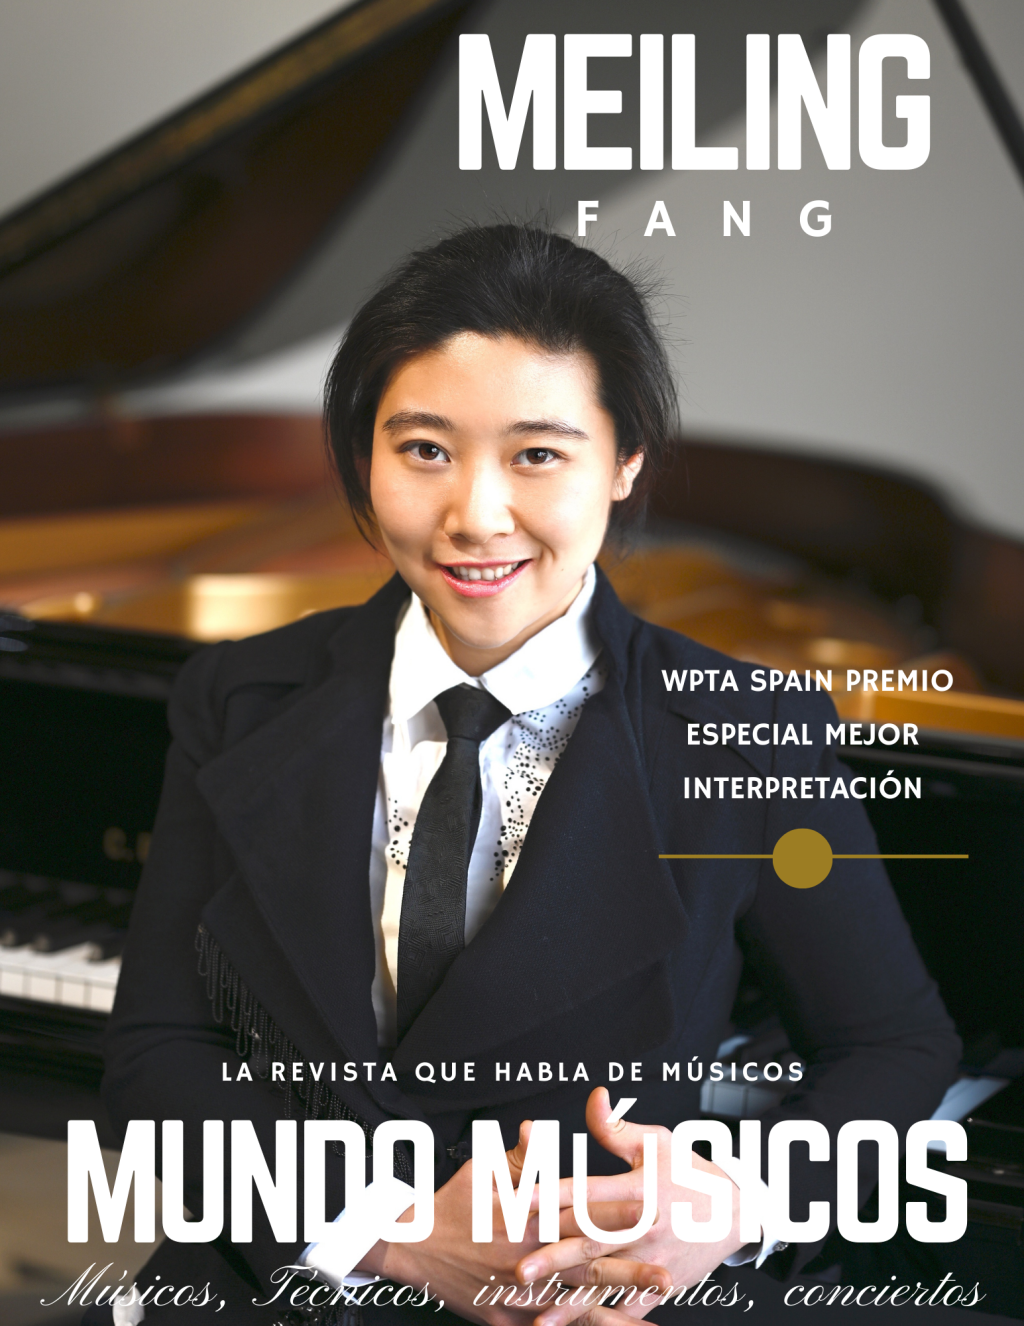 Meiling Fang pianist interview